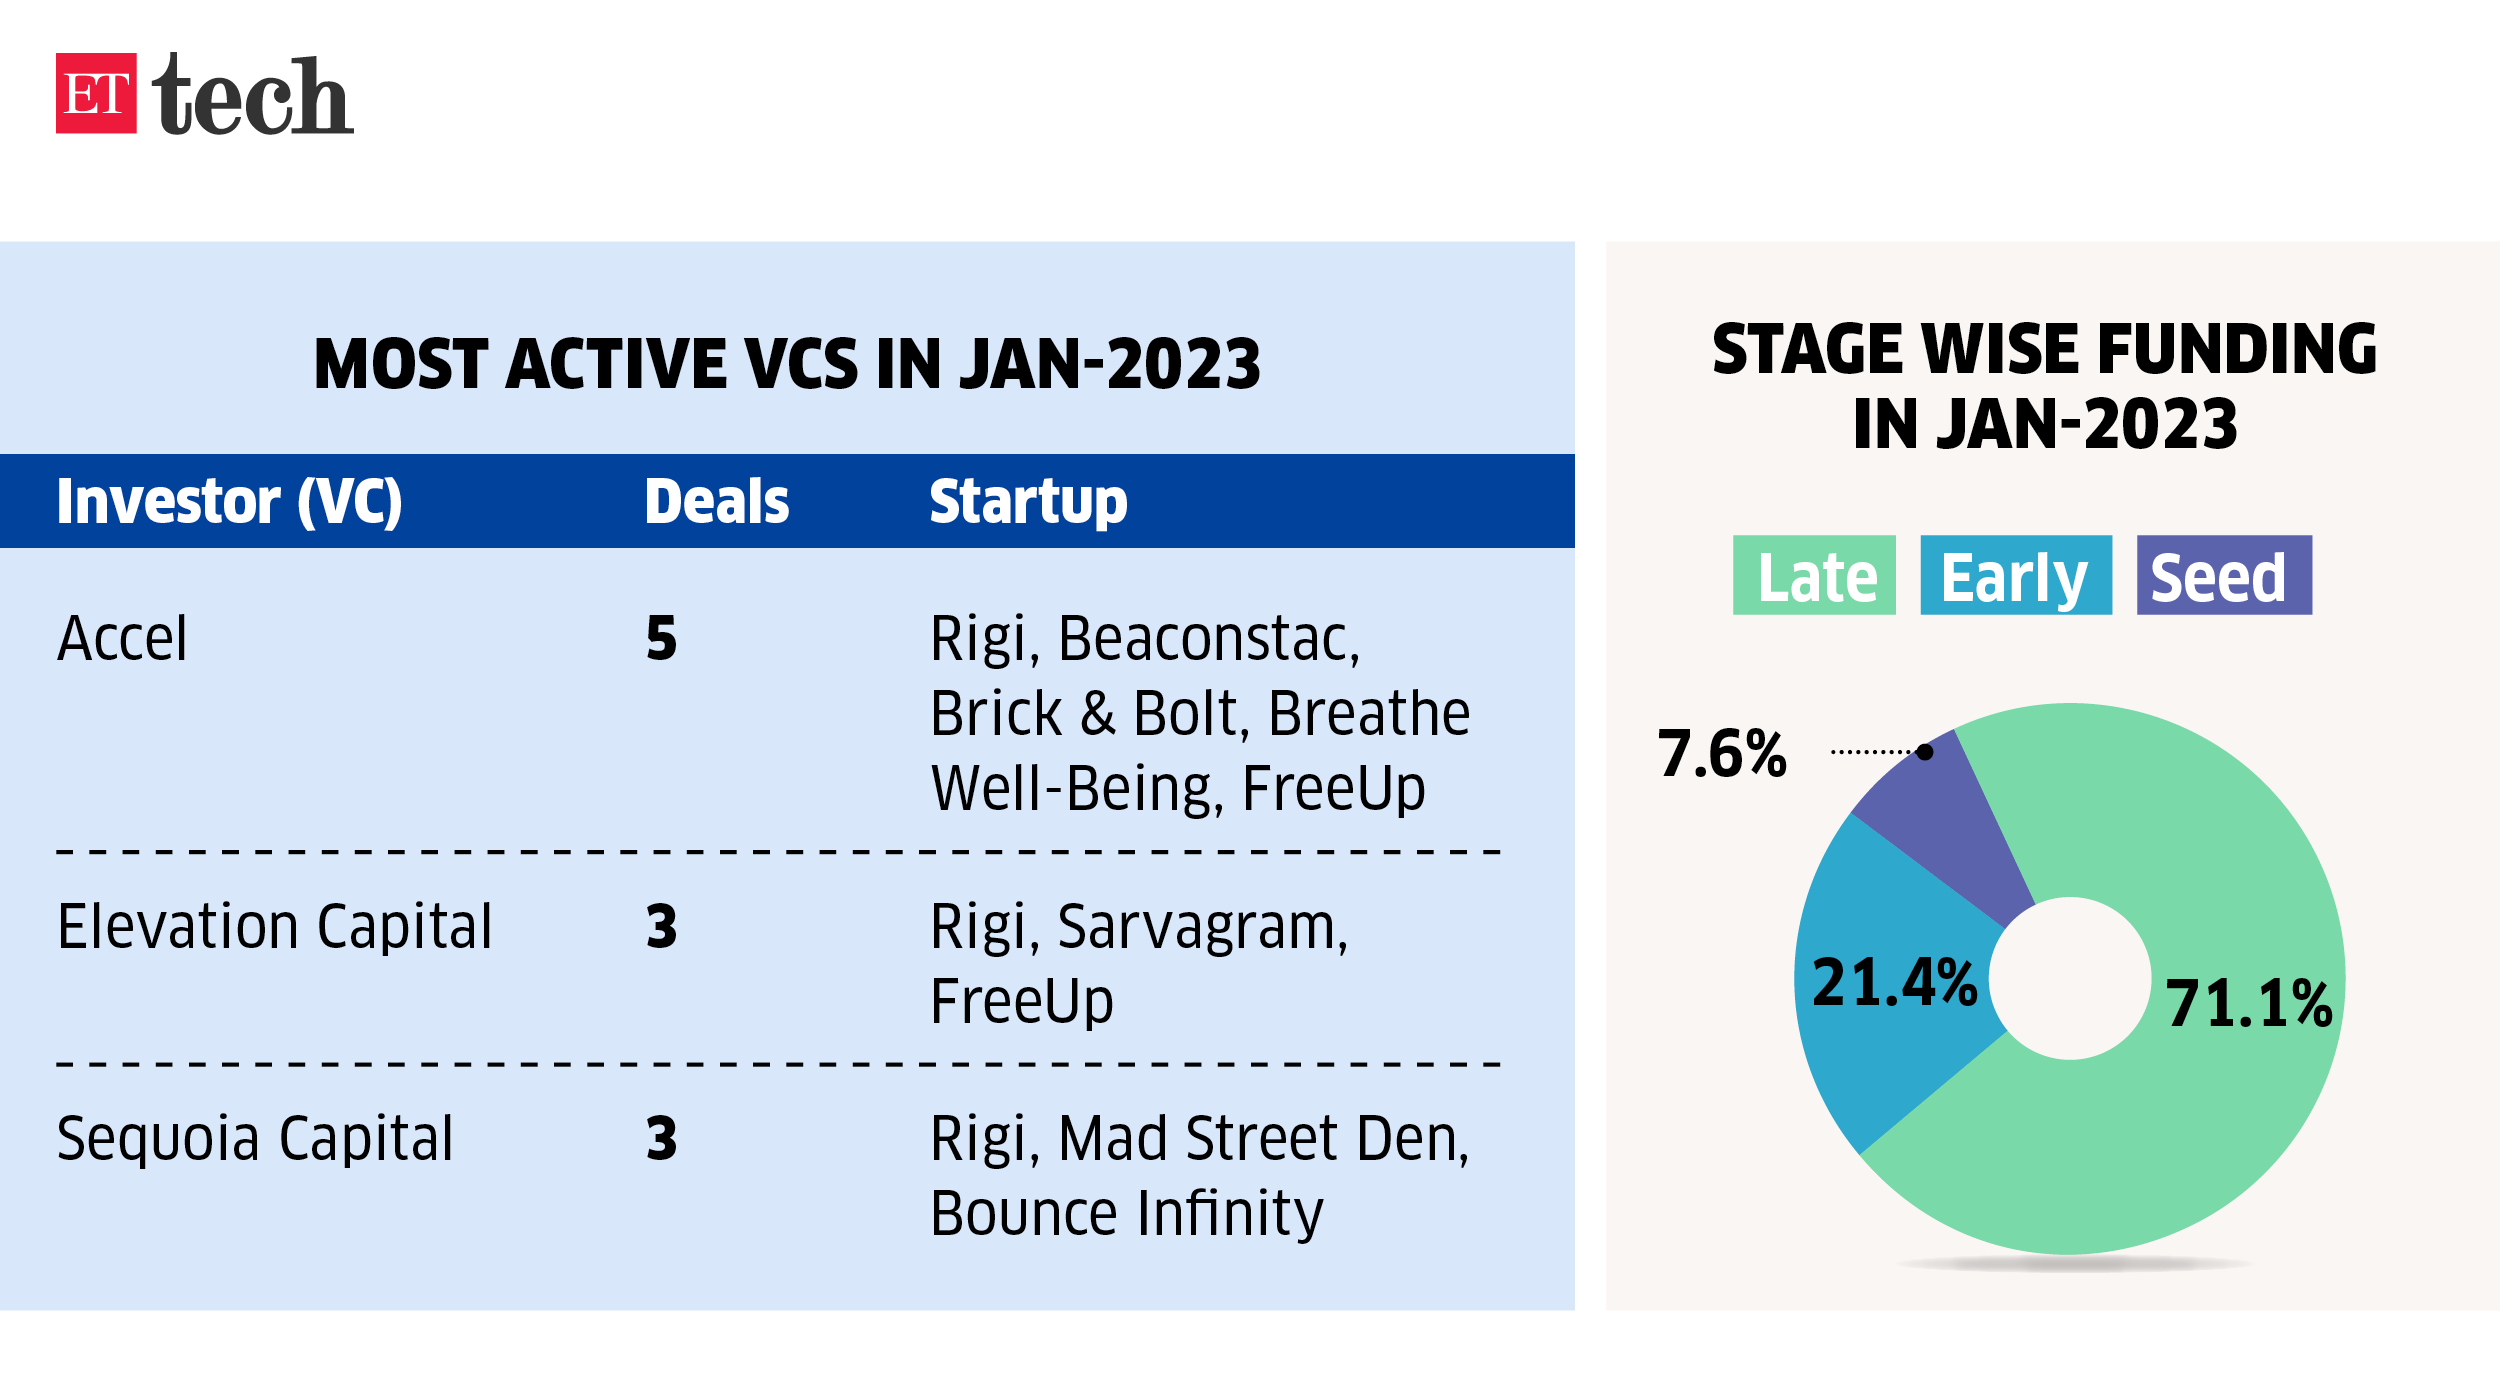 Most active VCs for the period